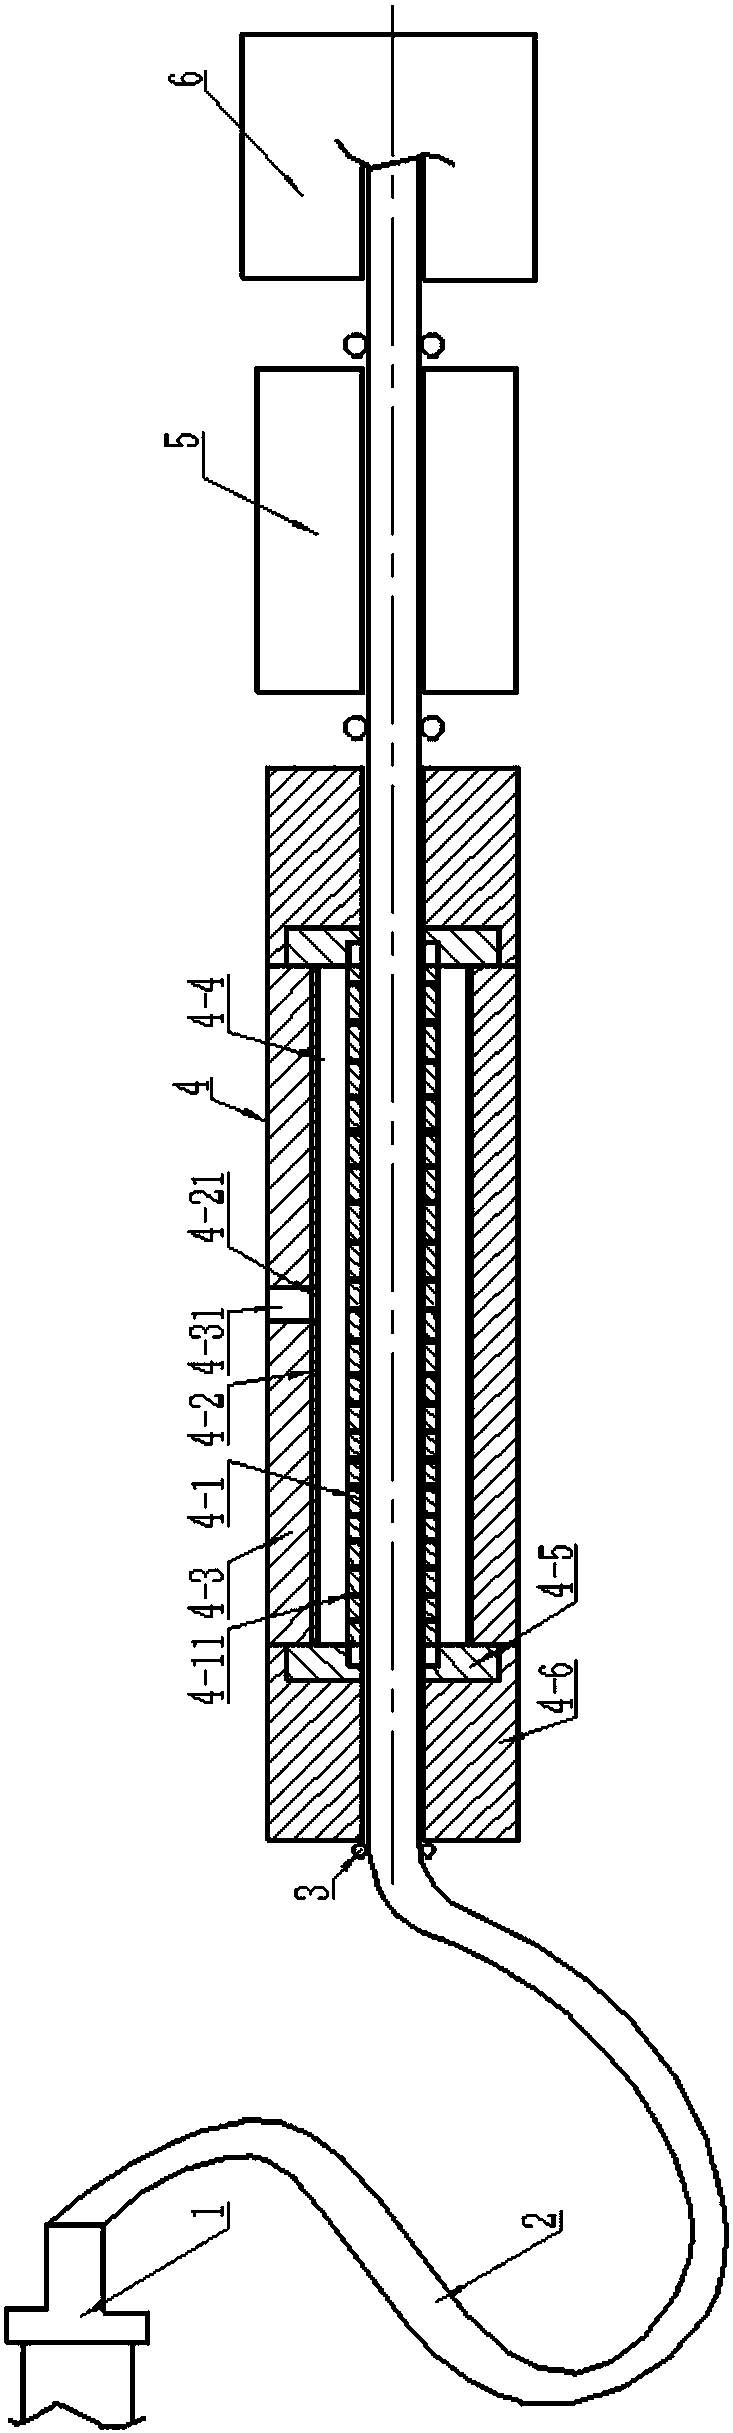 Perforating method for perforating one row of holes in hose